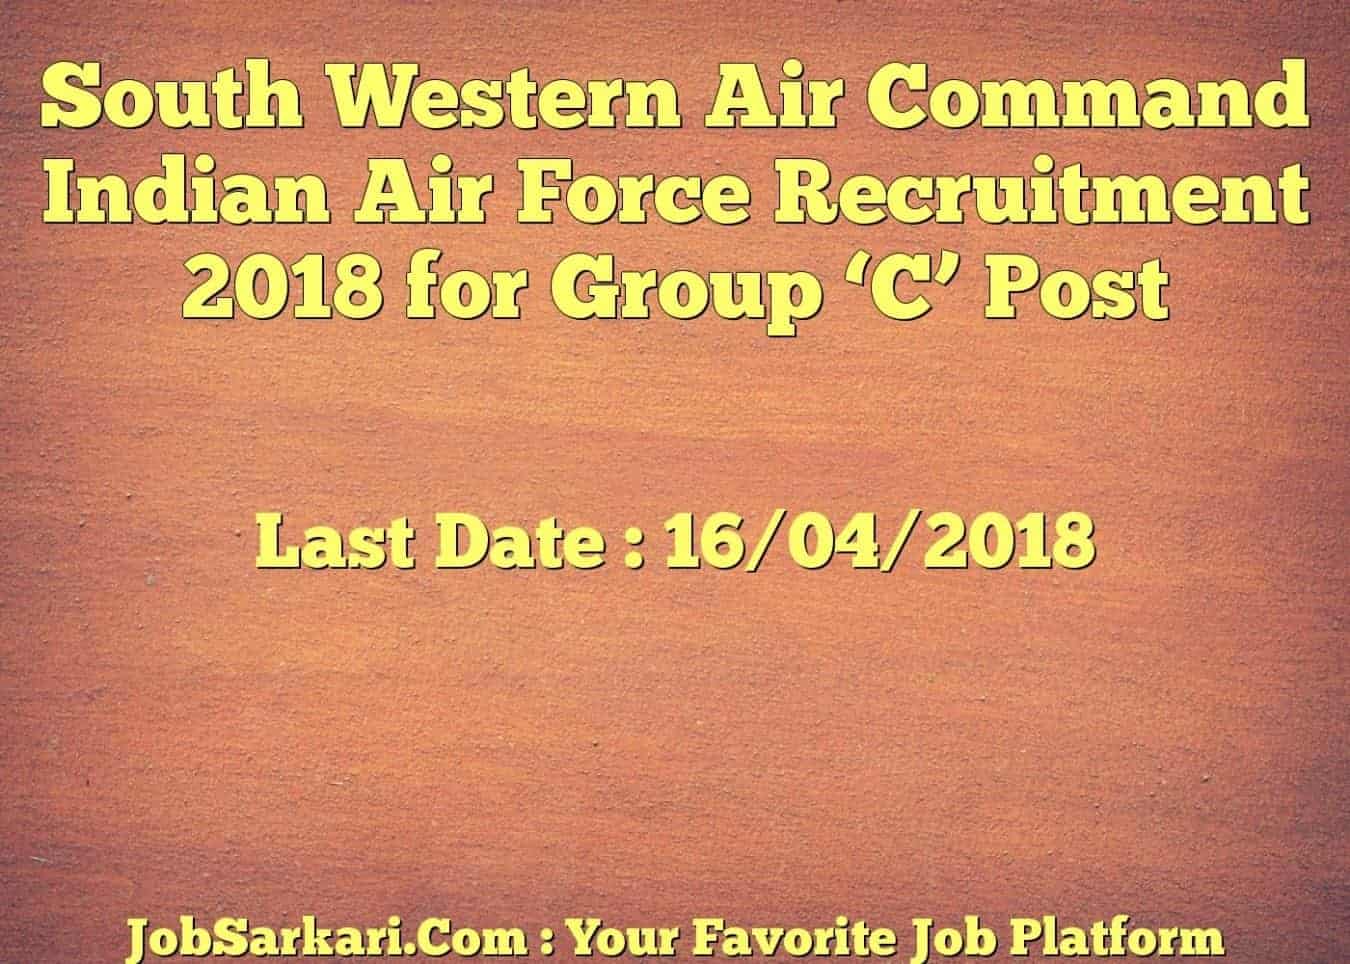 South Western Air Command Indian Air Force Recruitment 2018 for Group ‘C’ Post